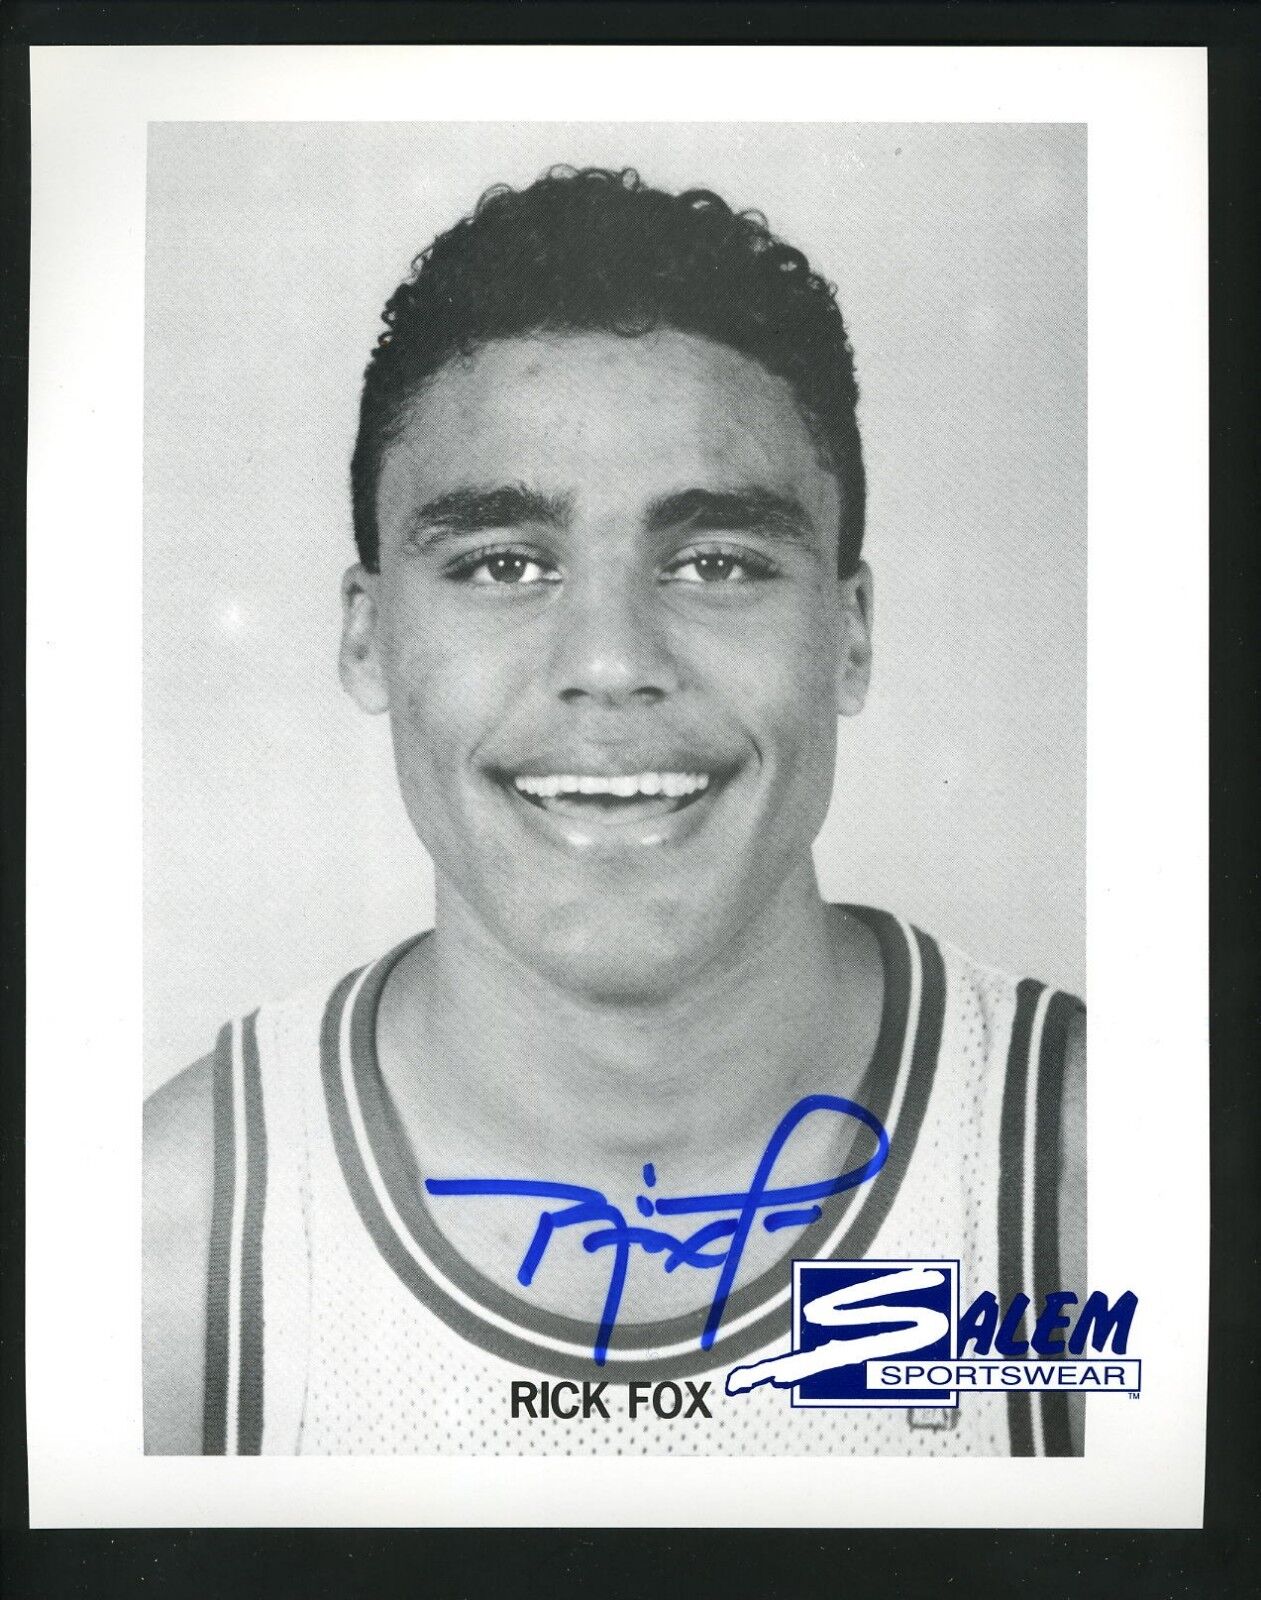 Rick Fox Signed 8x10 Photo Poster painting Autographed Los Angeles Lakers Boston Celtics